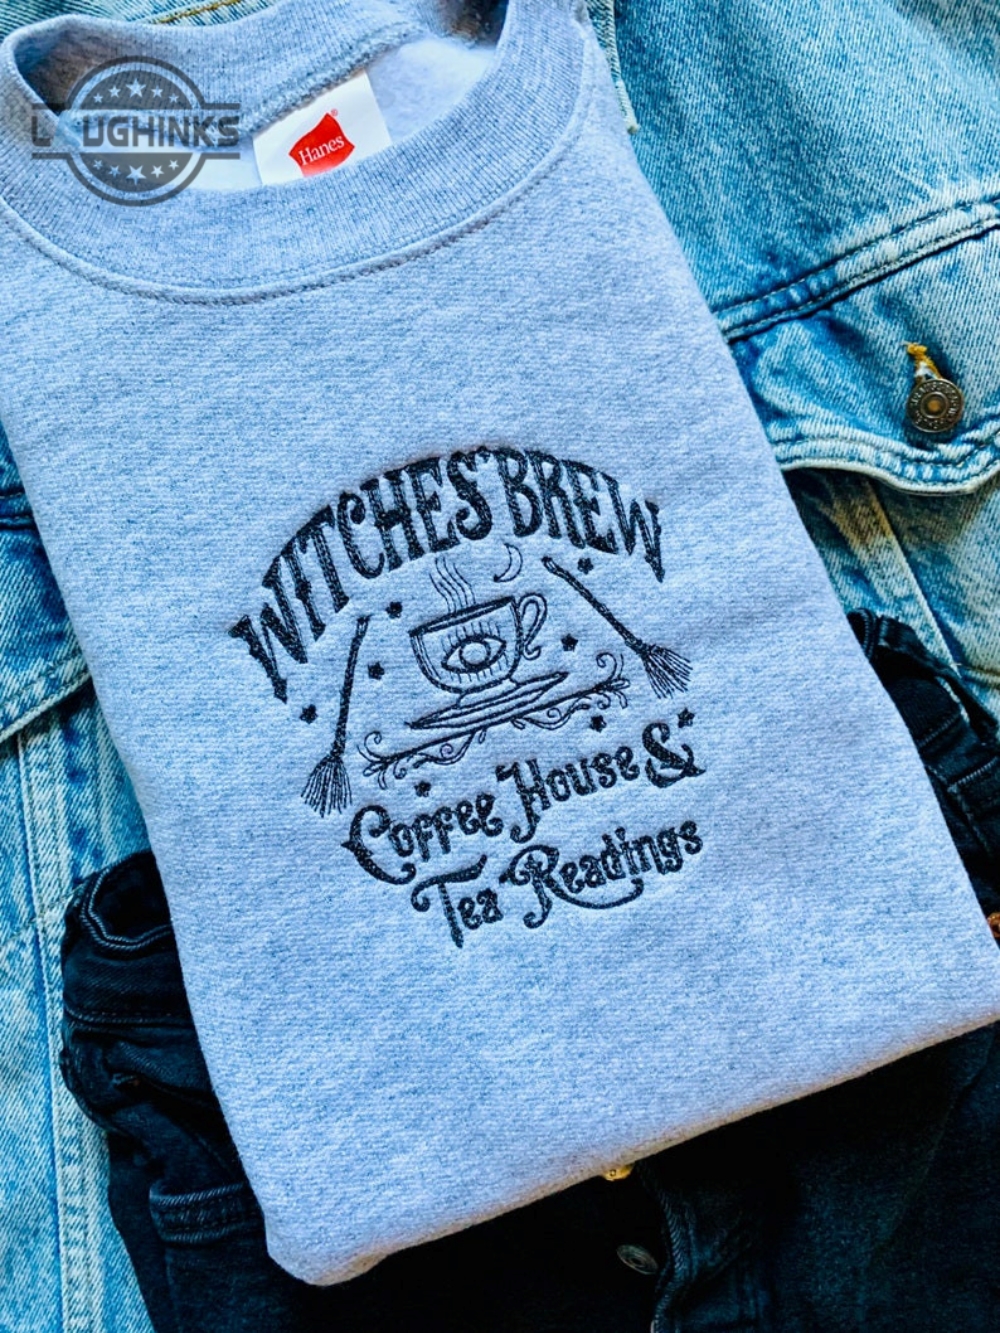 Witches Brew Embroidered Crewneck Embroidery Tshirt Sweatshirt Hoodie Gift